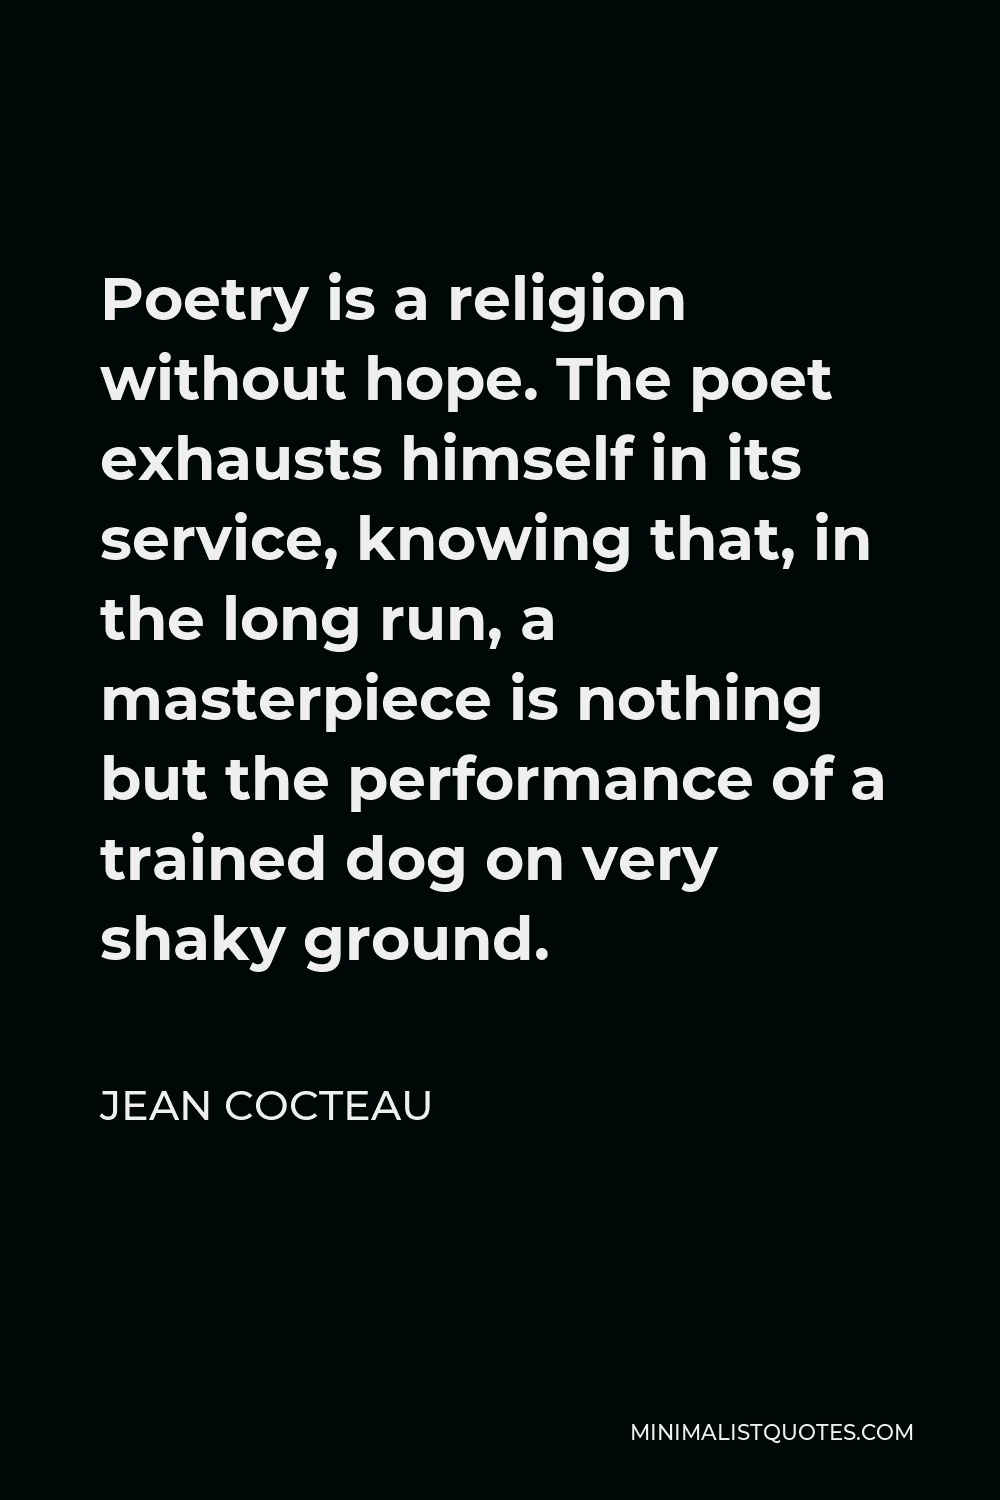 Jean Cocteau Quote - Poetry is a religion without hope. The poet exhausts himself in its service, knowing that, in the long run, a masterpiece is nothing but the performance of a trained dog on very shaky ground.